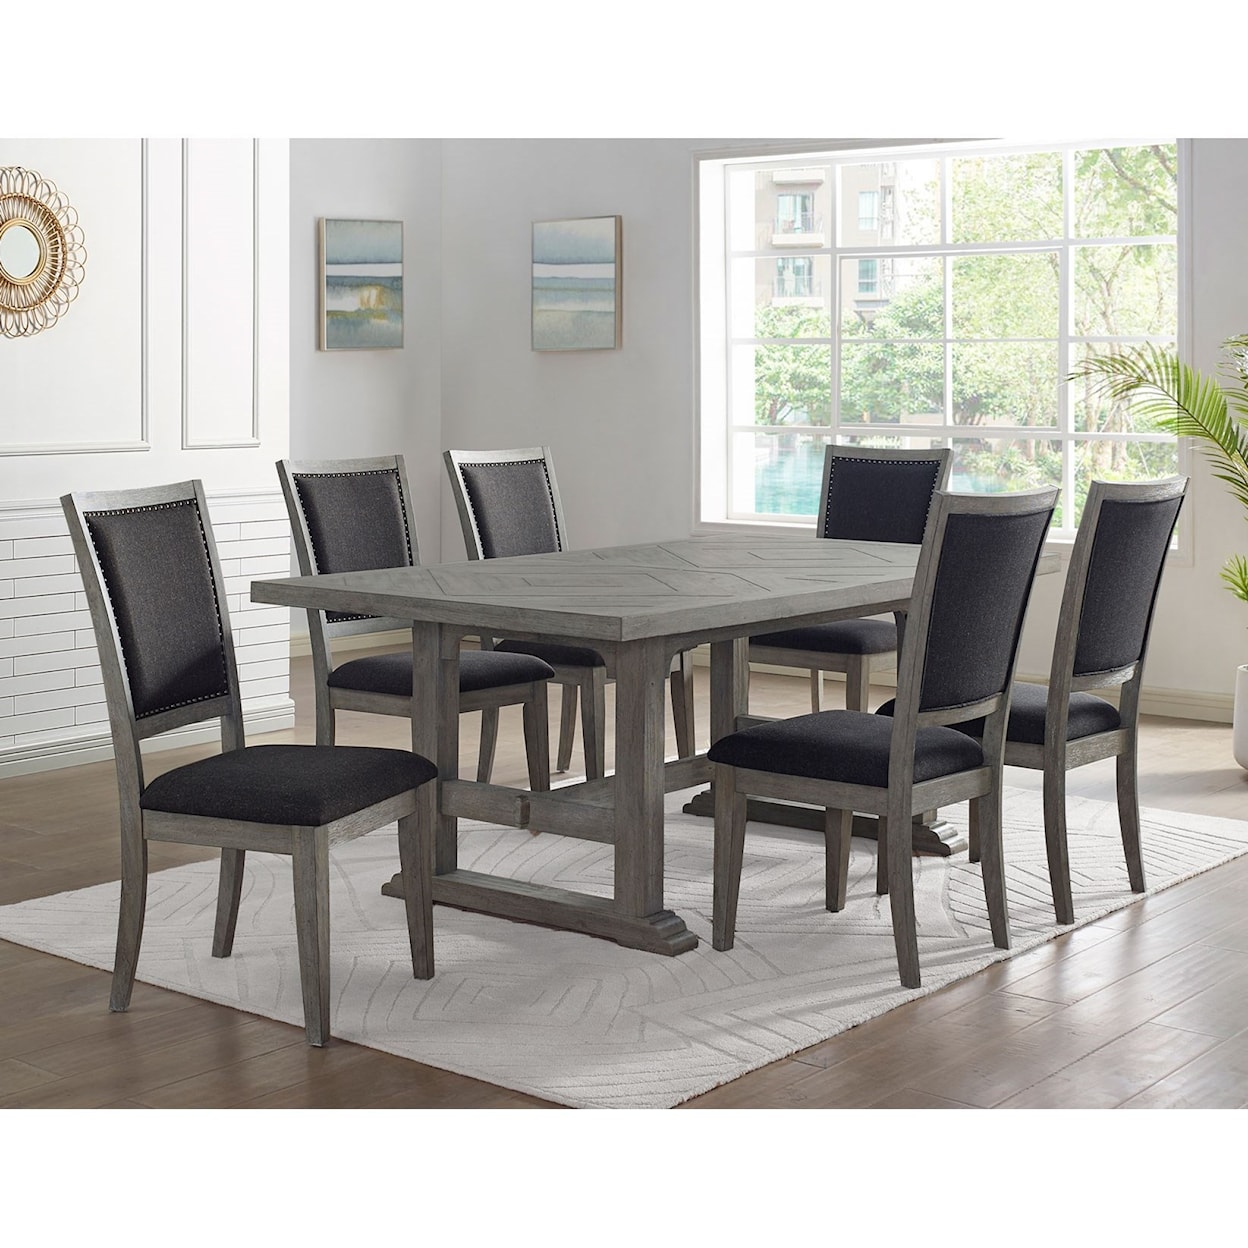 Steve Silver Whitford 78-inch Dining Table